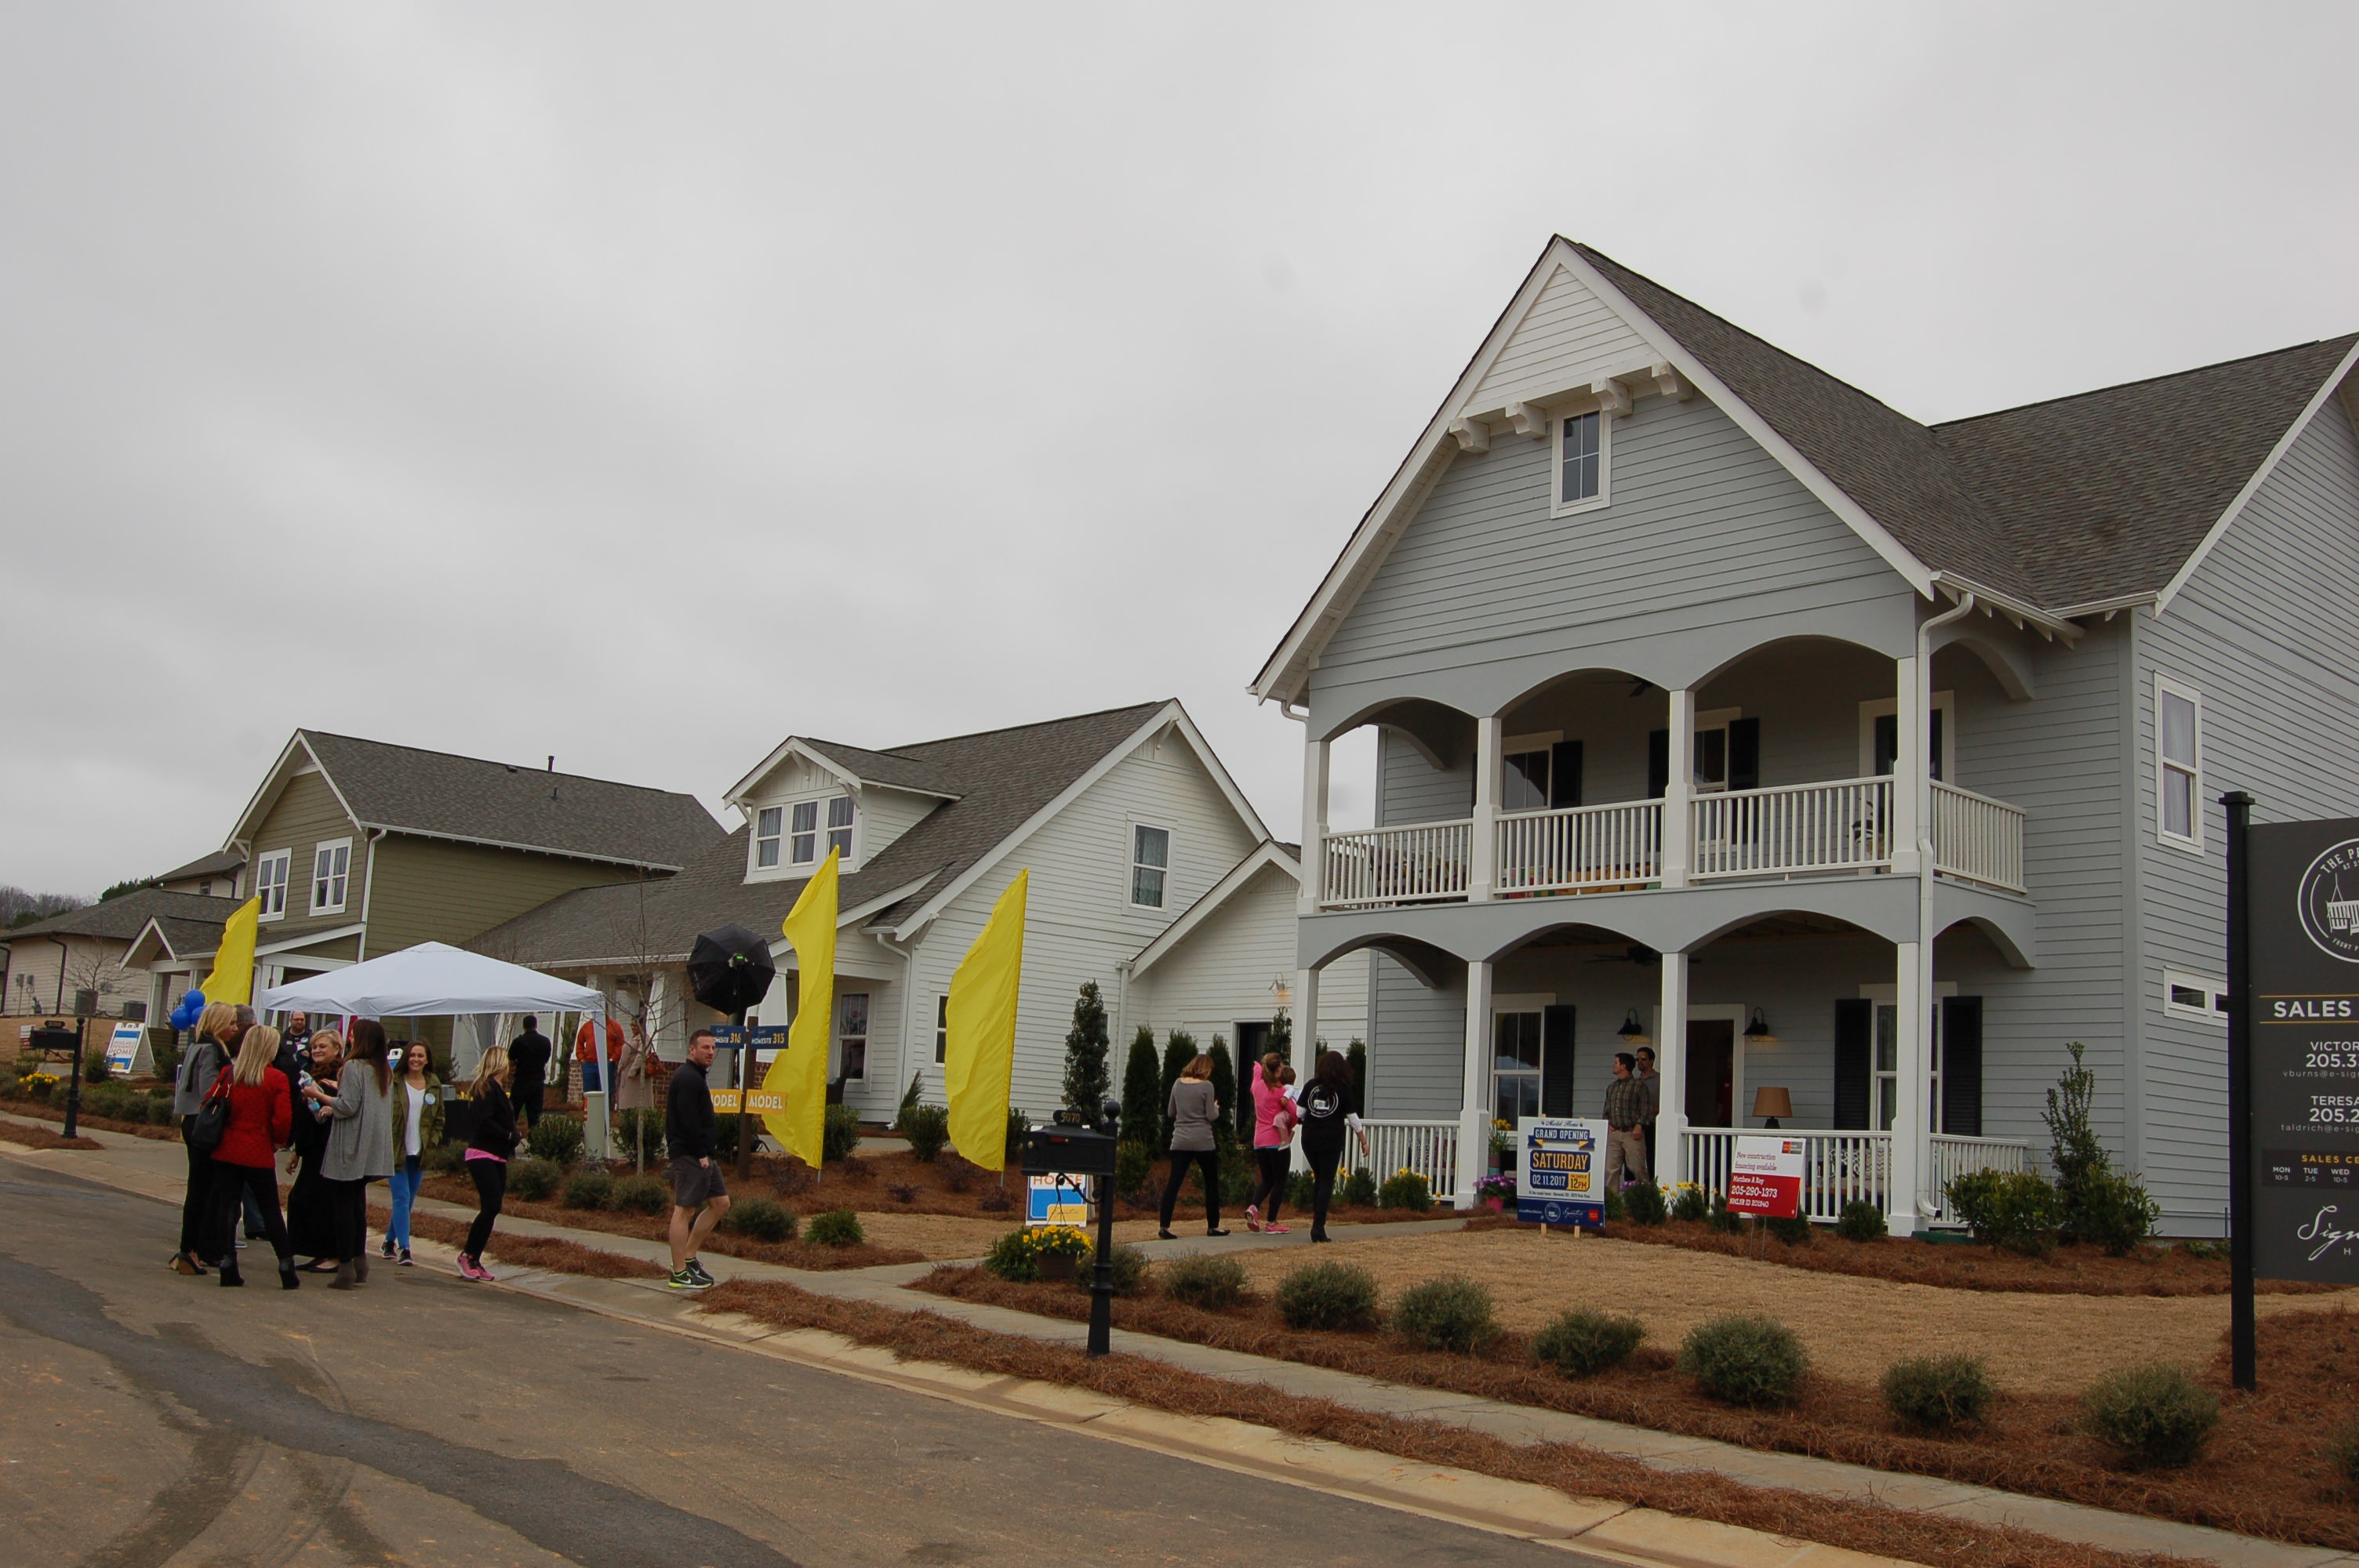 Signature Homes celebrates new model homes at Stockton community in Trussville